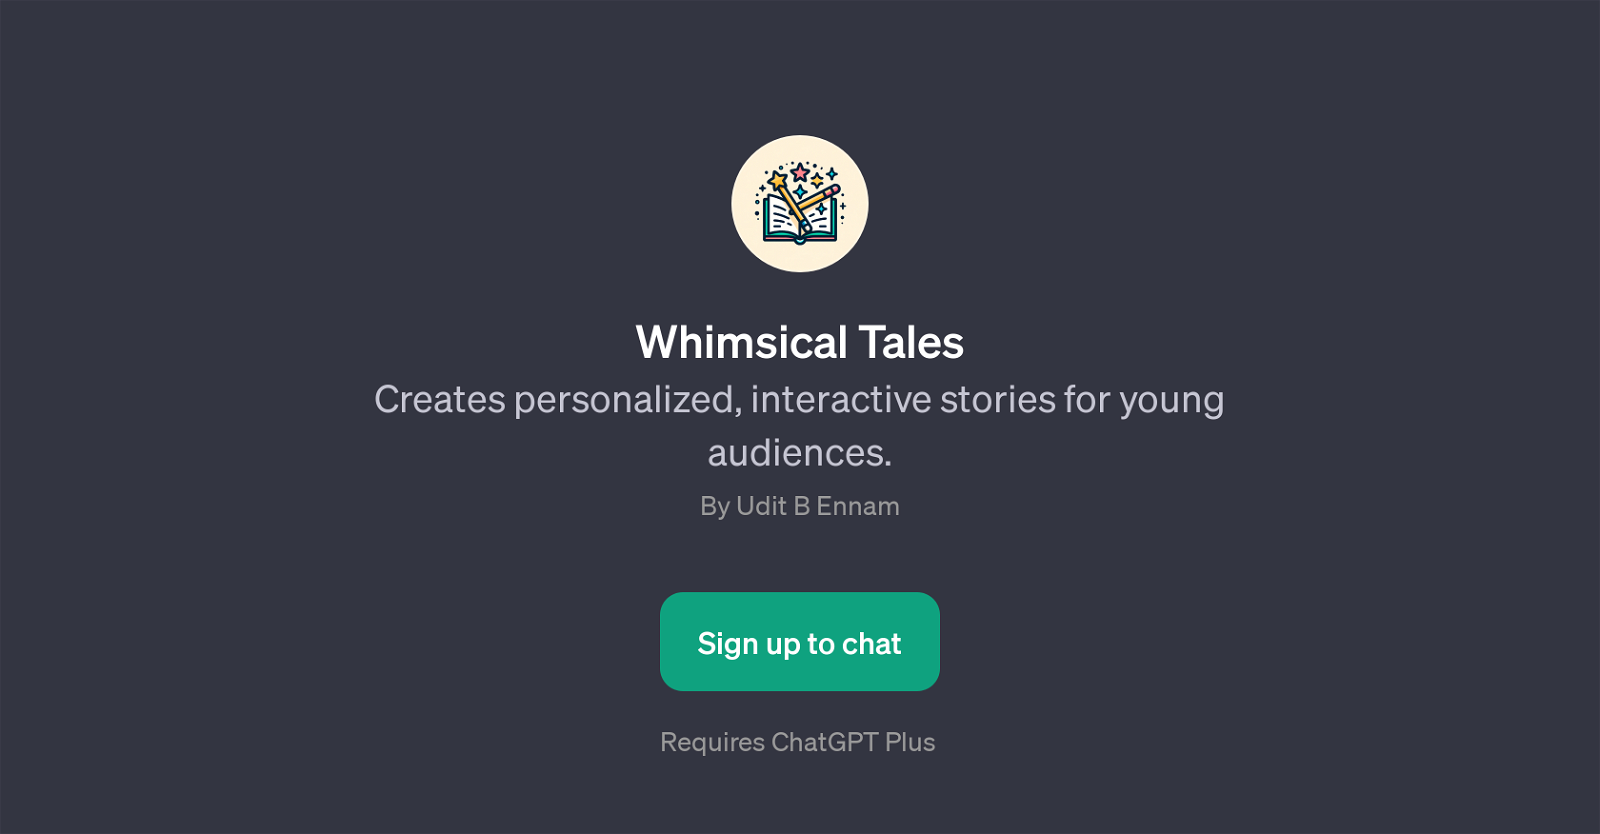 Whimsical Tales website